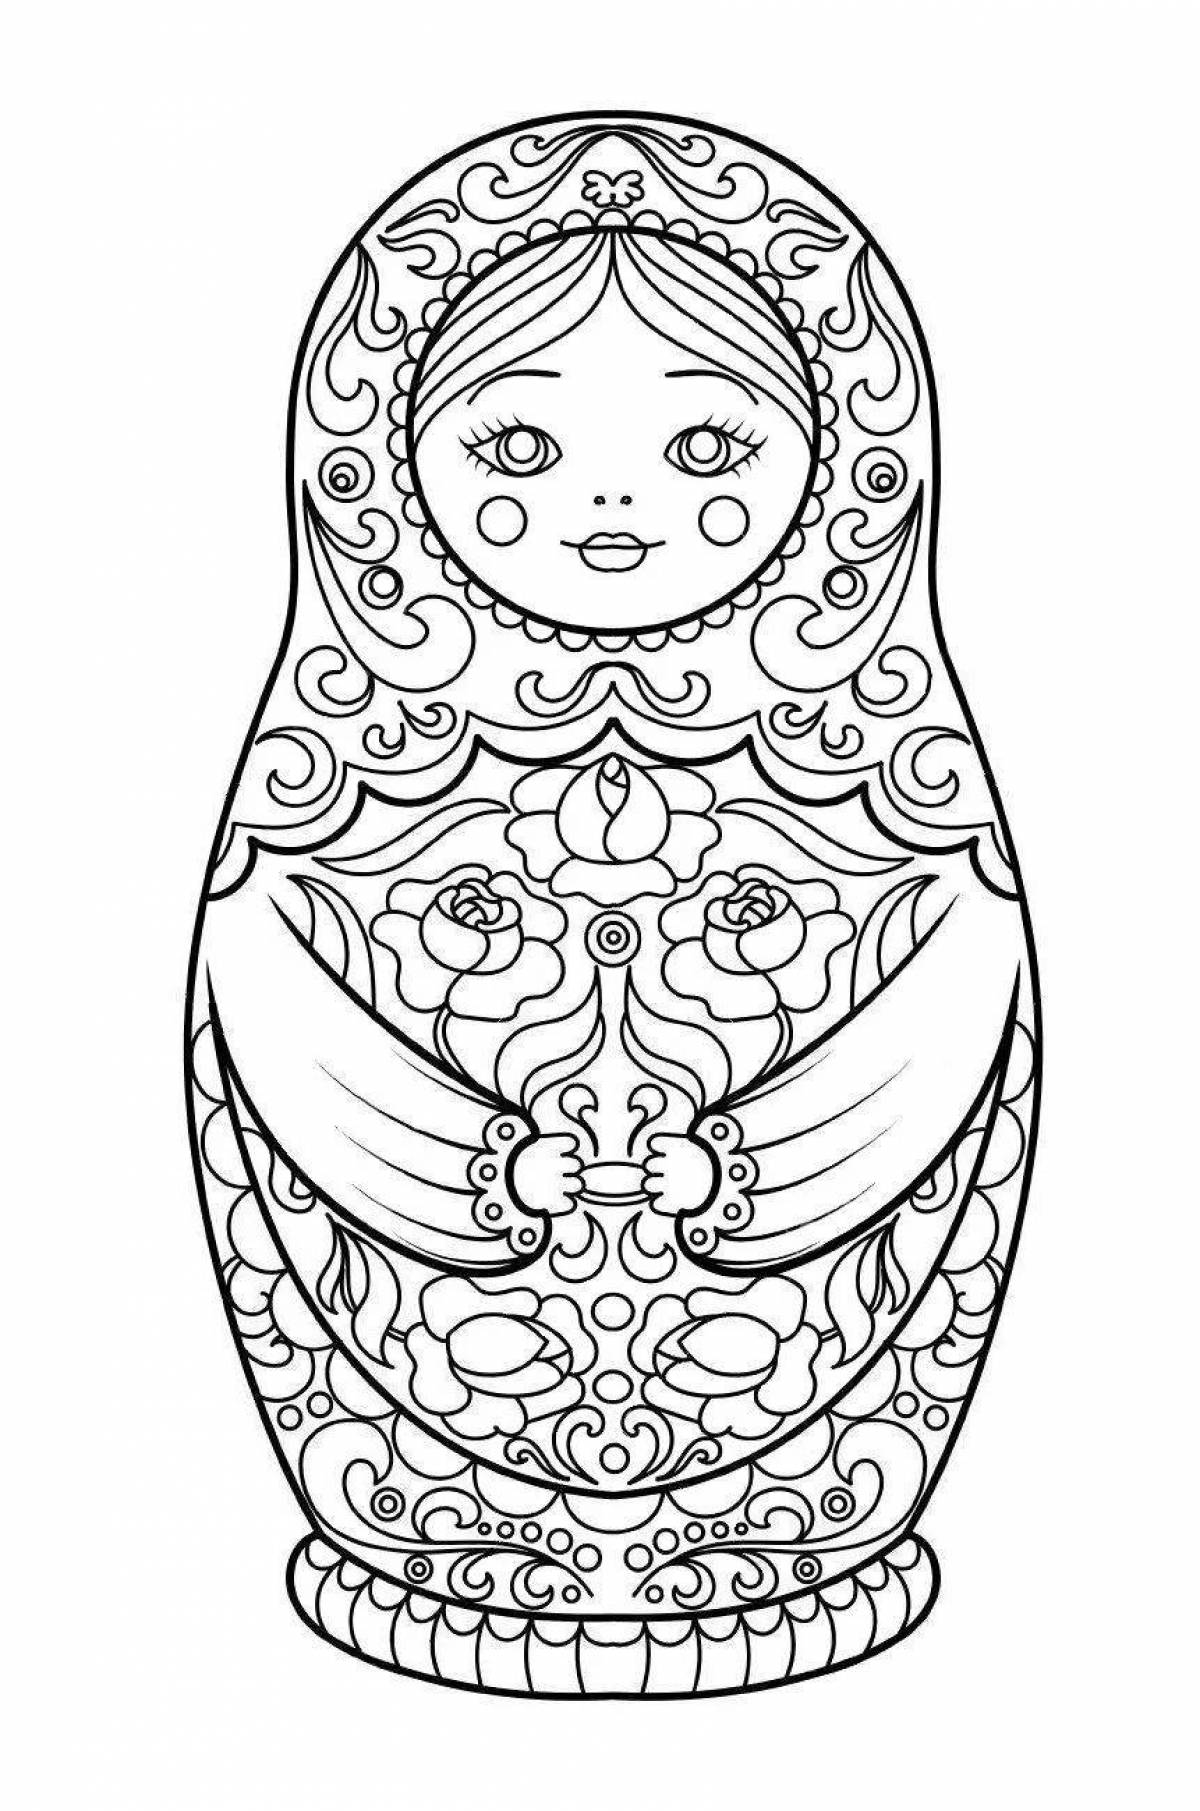 Delightful Russian matryoshka coloring book for 6-7 year olds